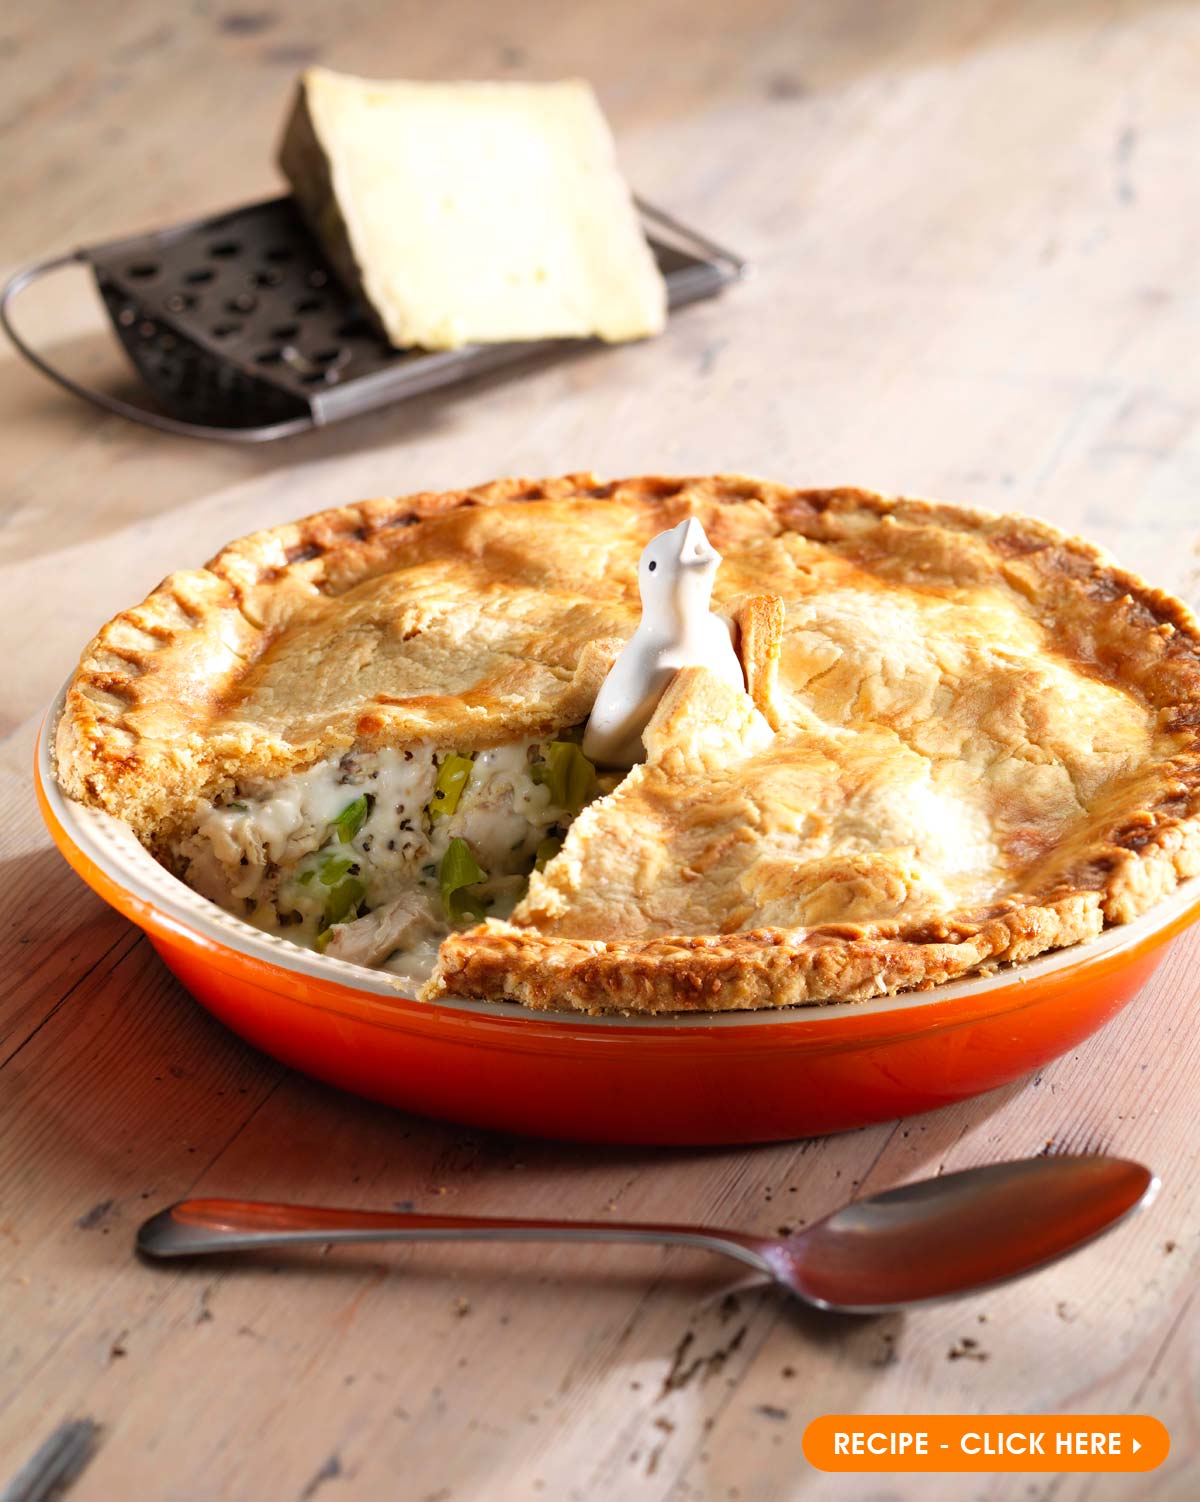 Le Creuset  Easy as Pie: Top Tips for Baking Perfect Pies